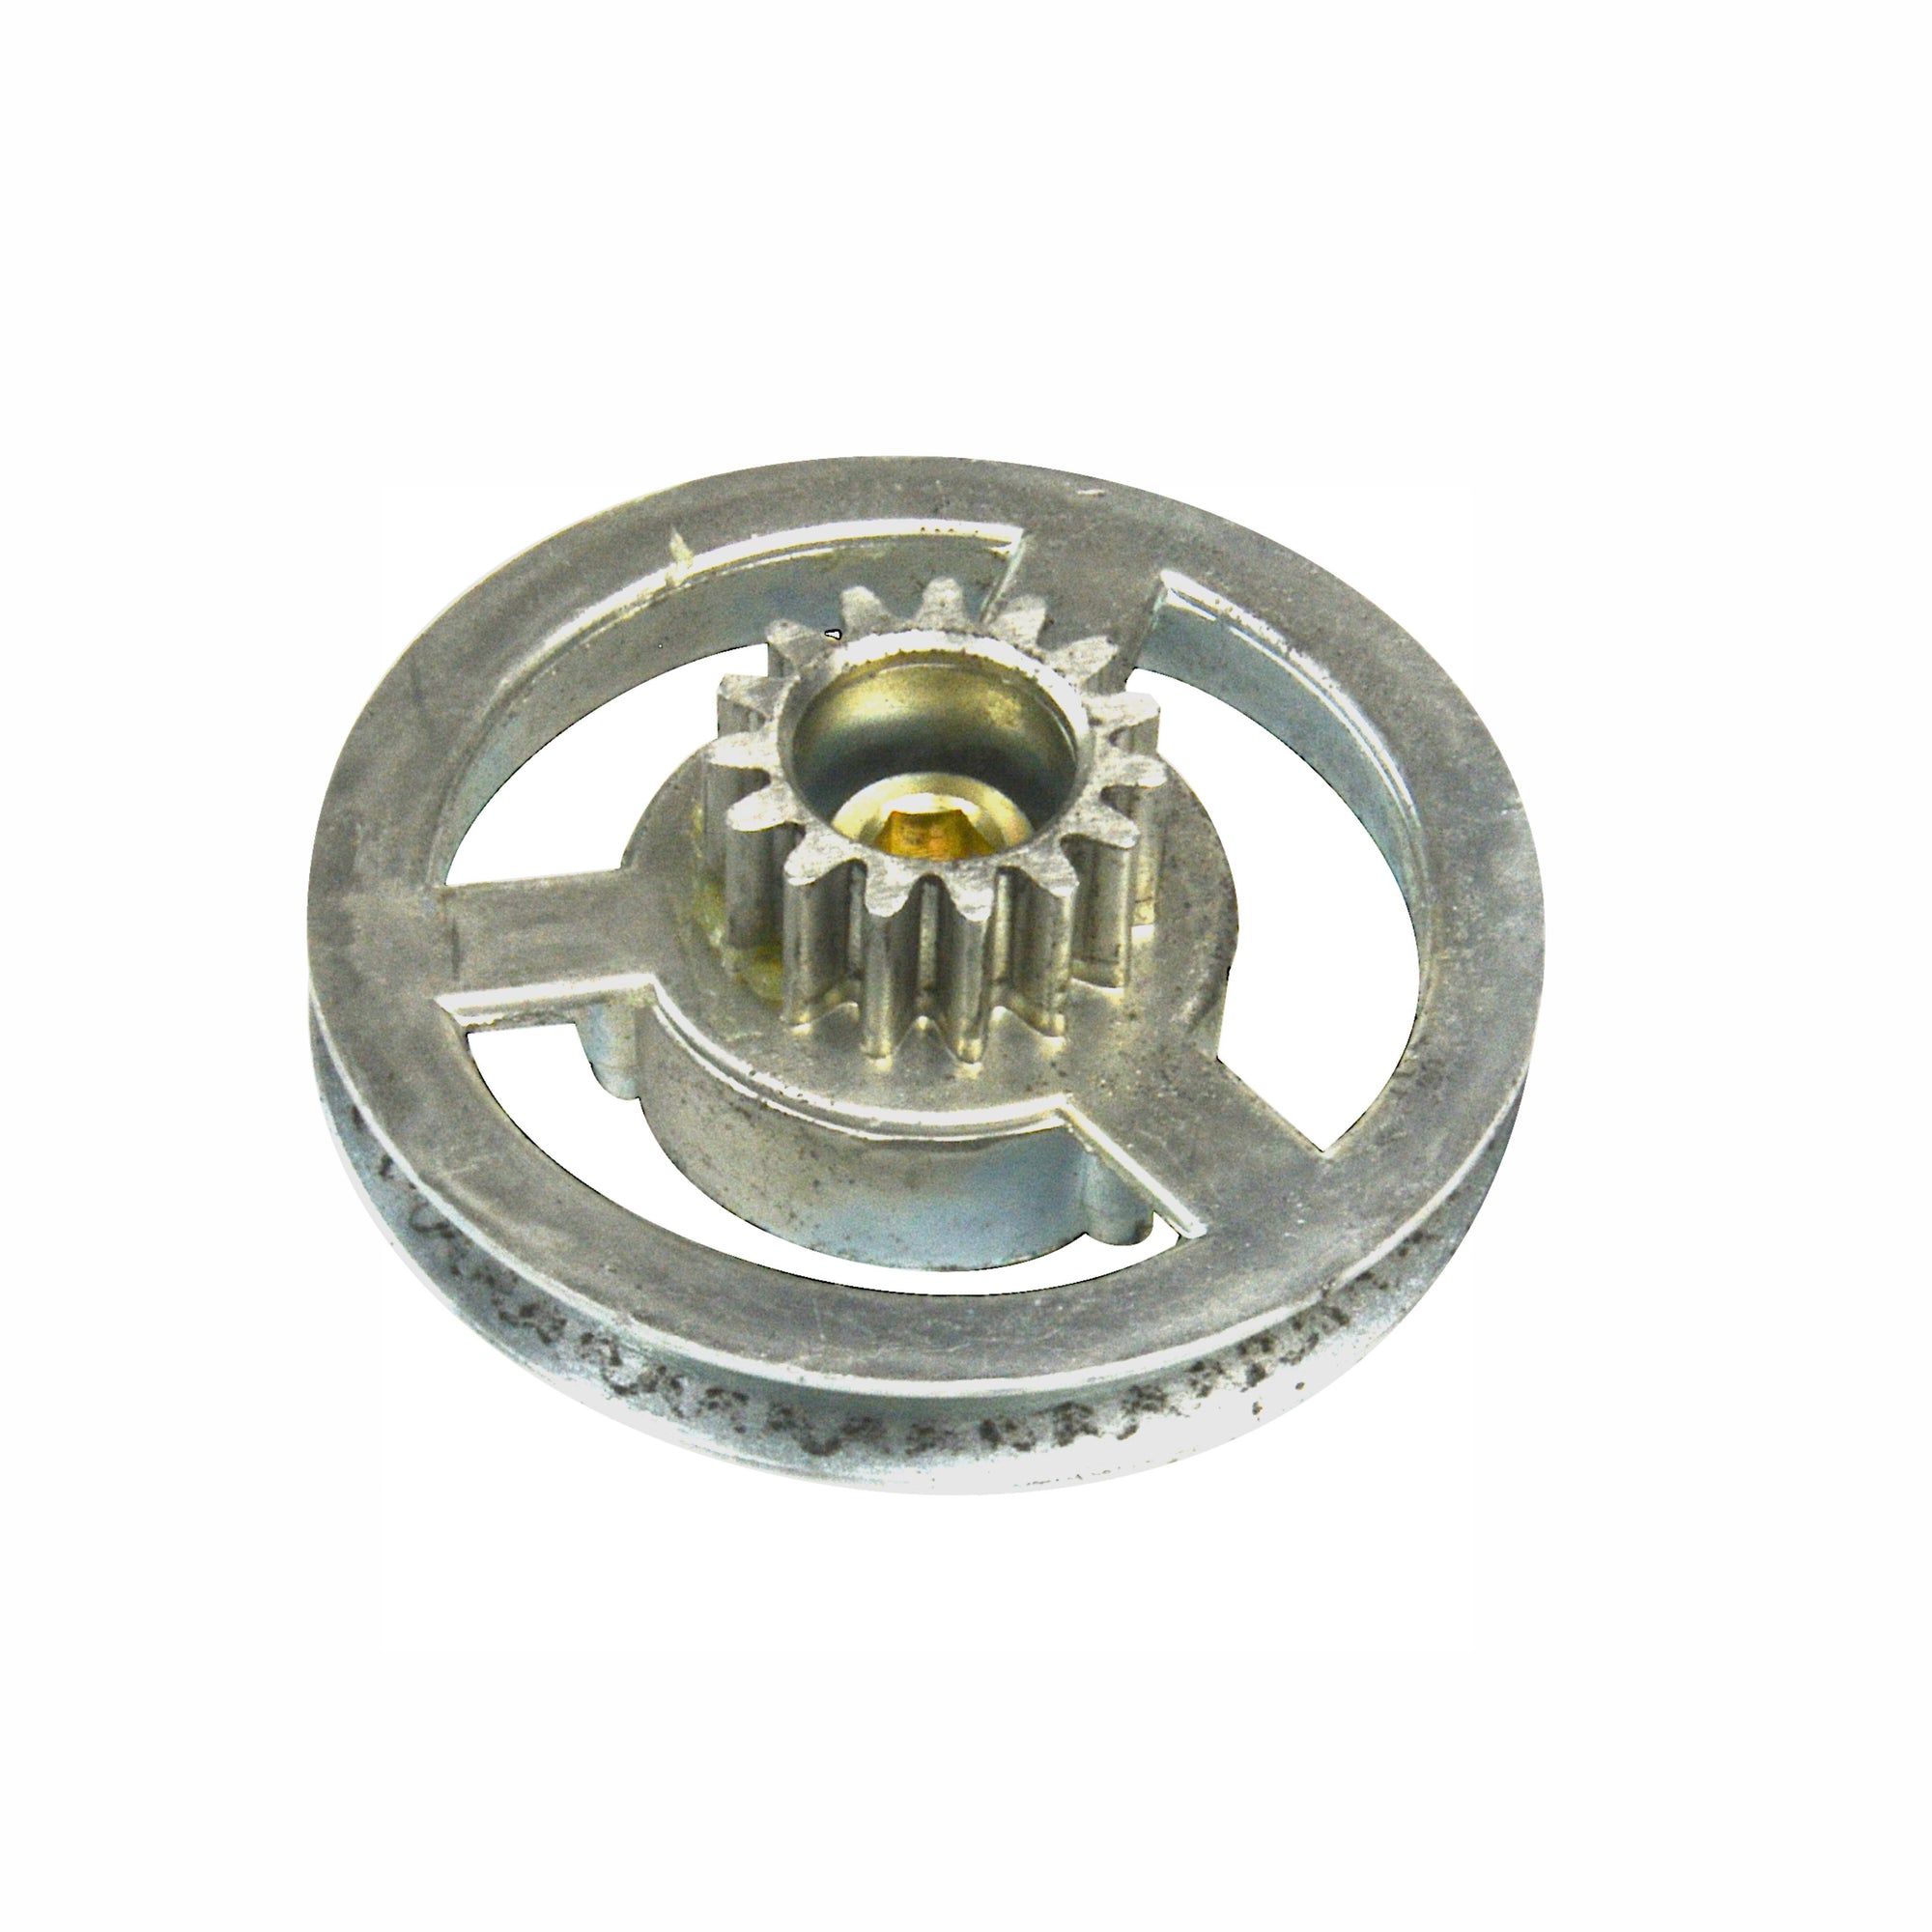 Aluminum Gear with Bearing Assembly